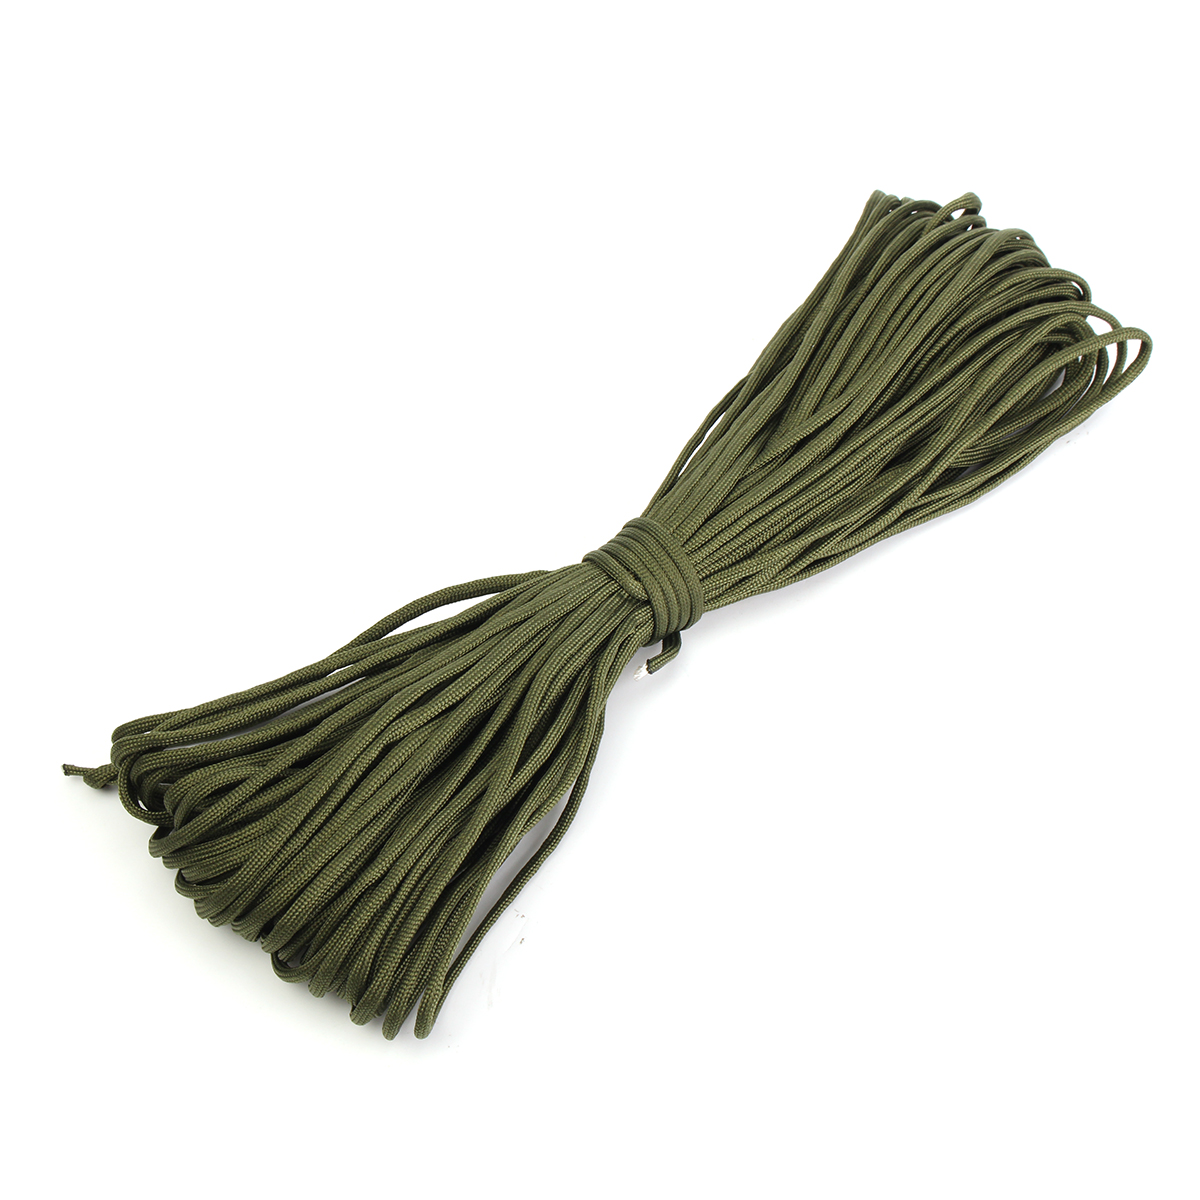 100FT30M-550lb-Paracord-Parachute-Lanyard-7-Strand-Core-Emergency-Army-Green-Rope-1222900-3